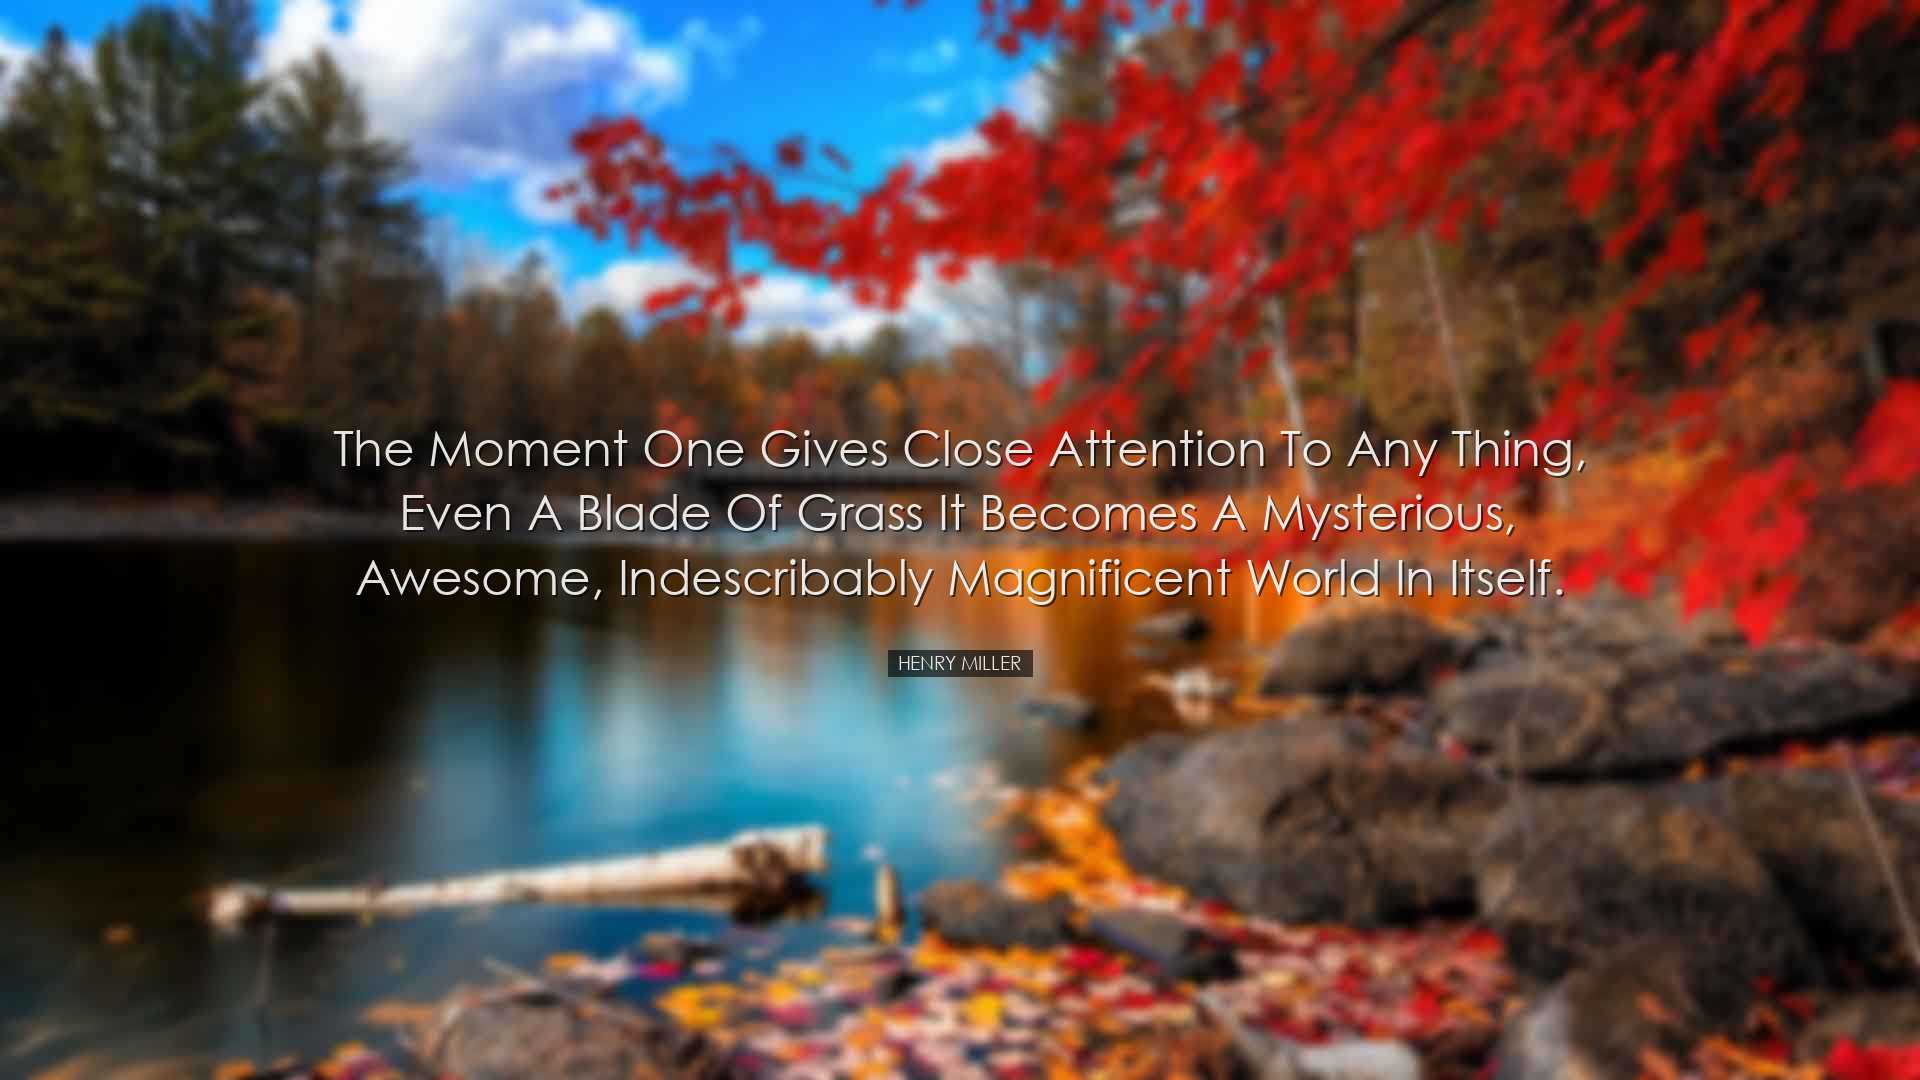 The moment one gives close attention to any thing, even a blade of